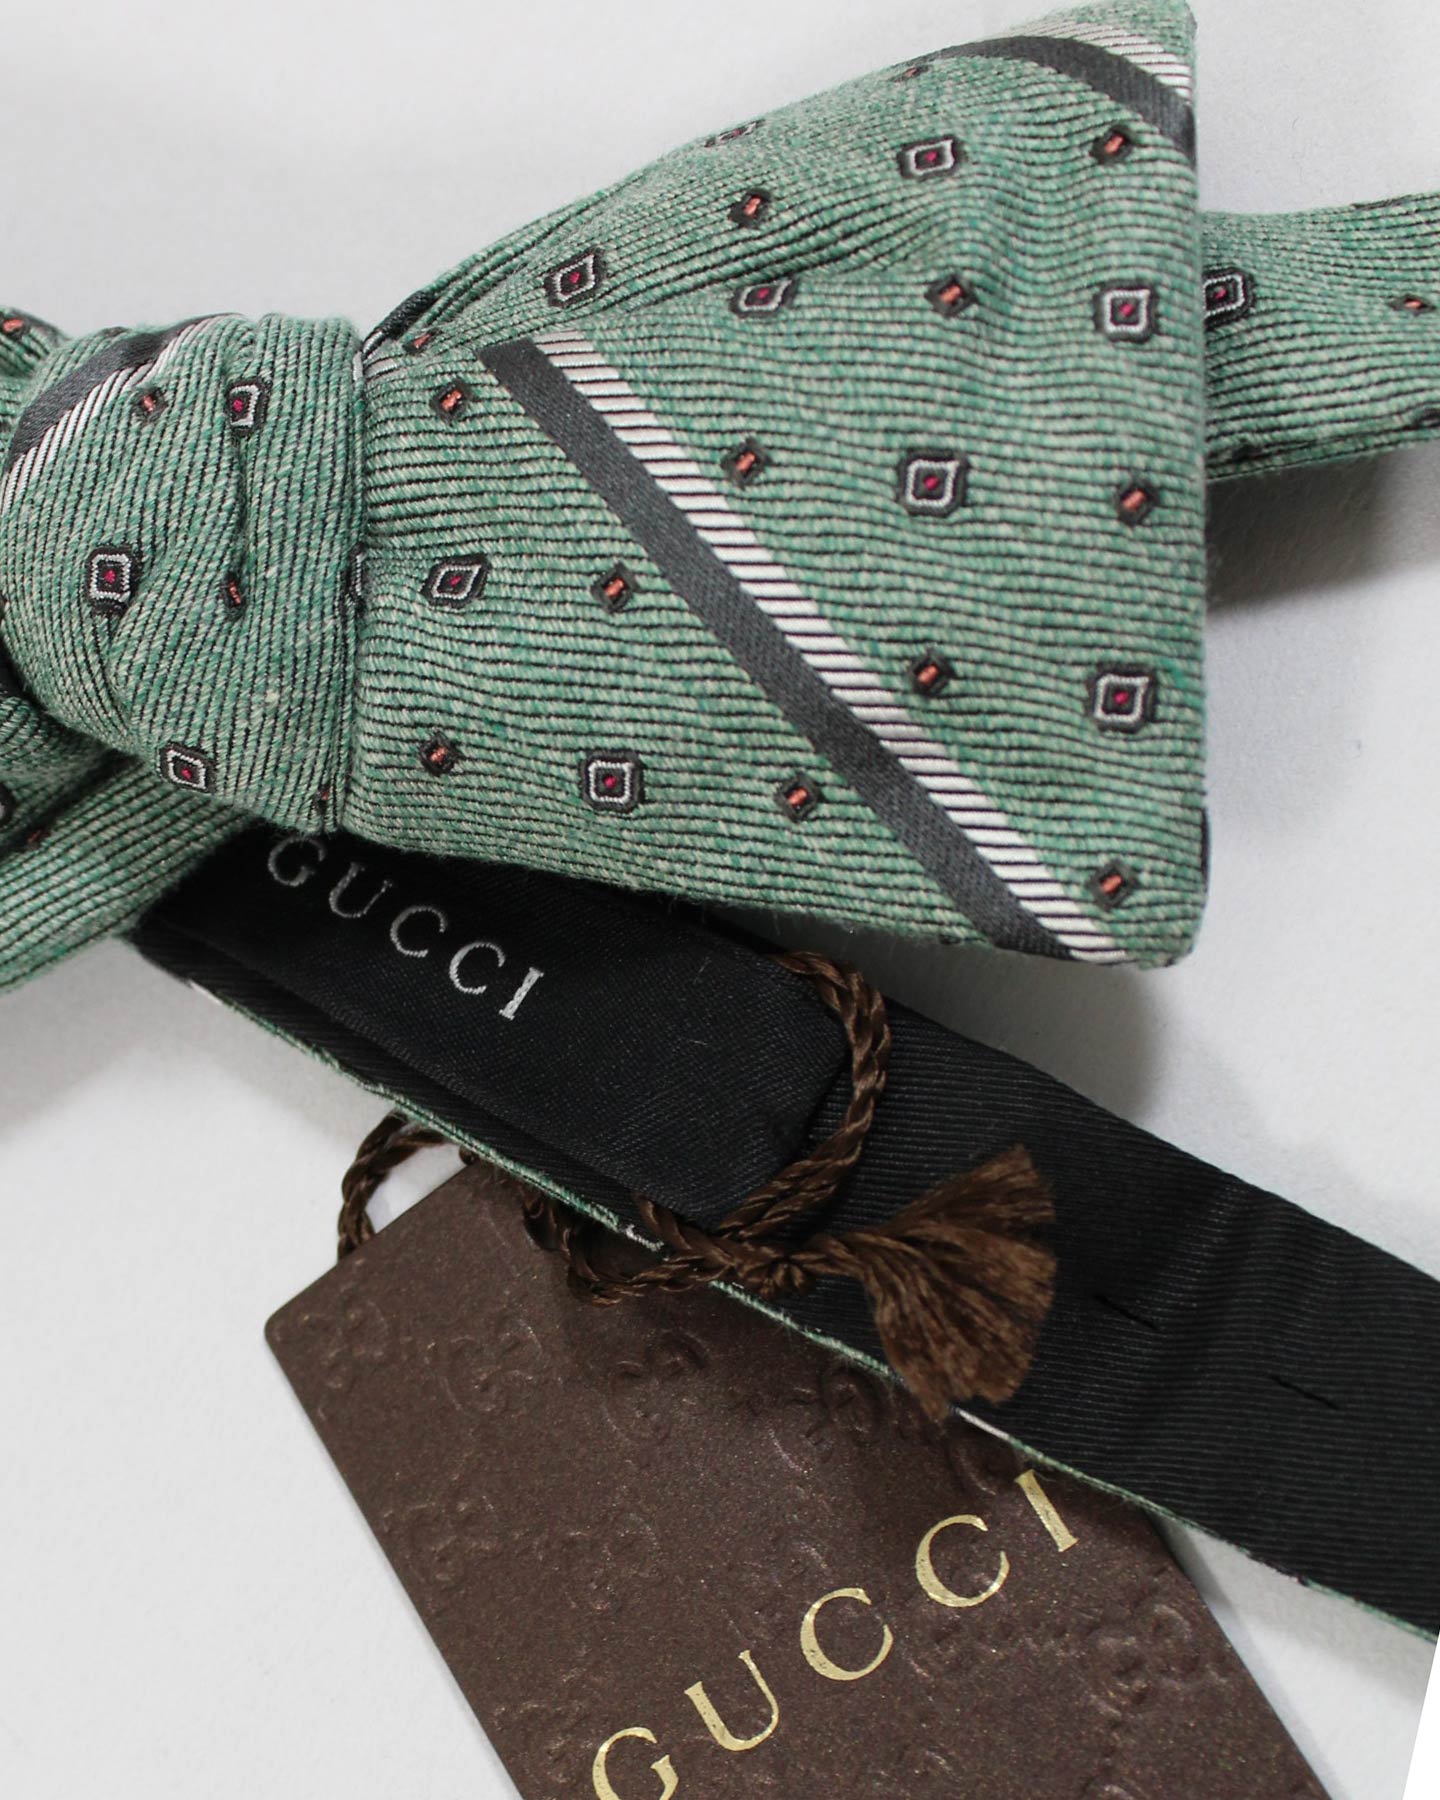 New Gucci Bow Tie DK Green Made in Italy